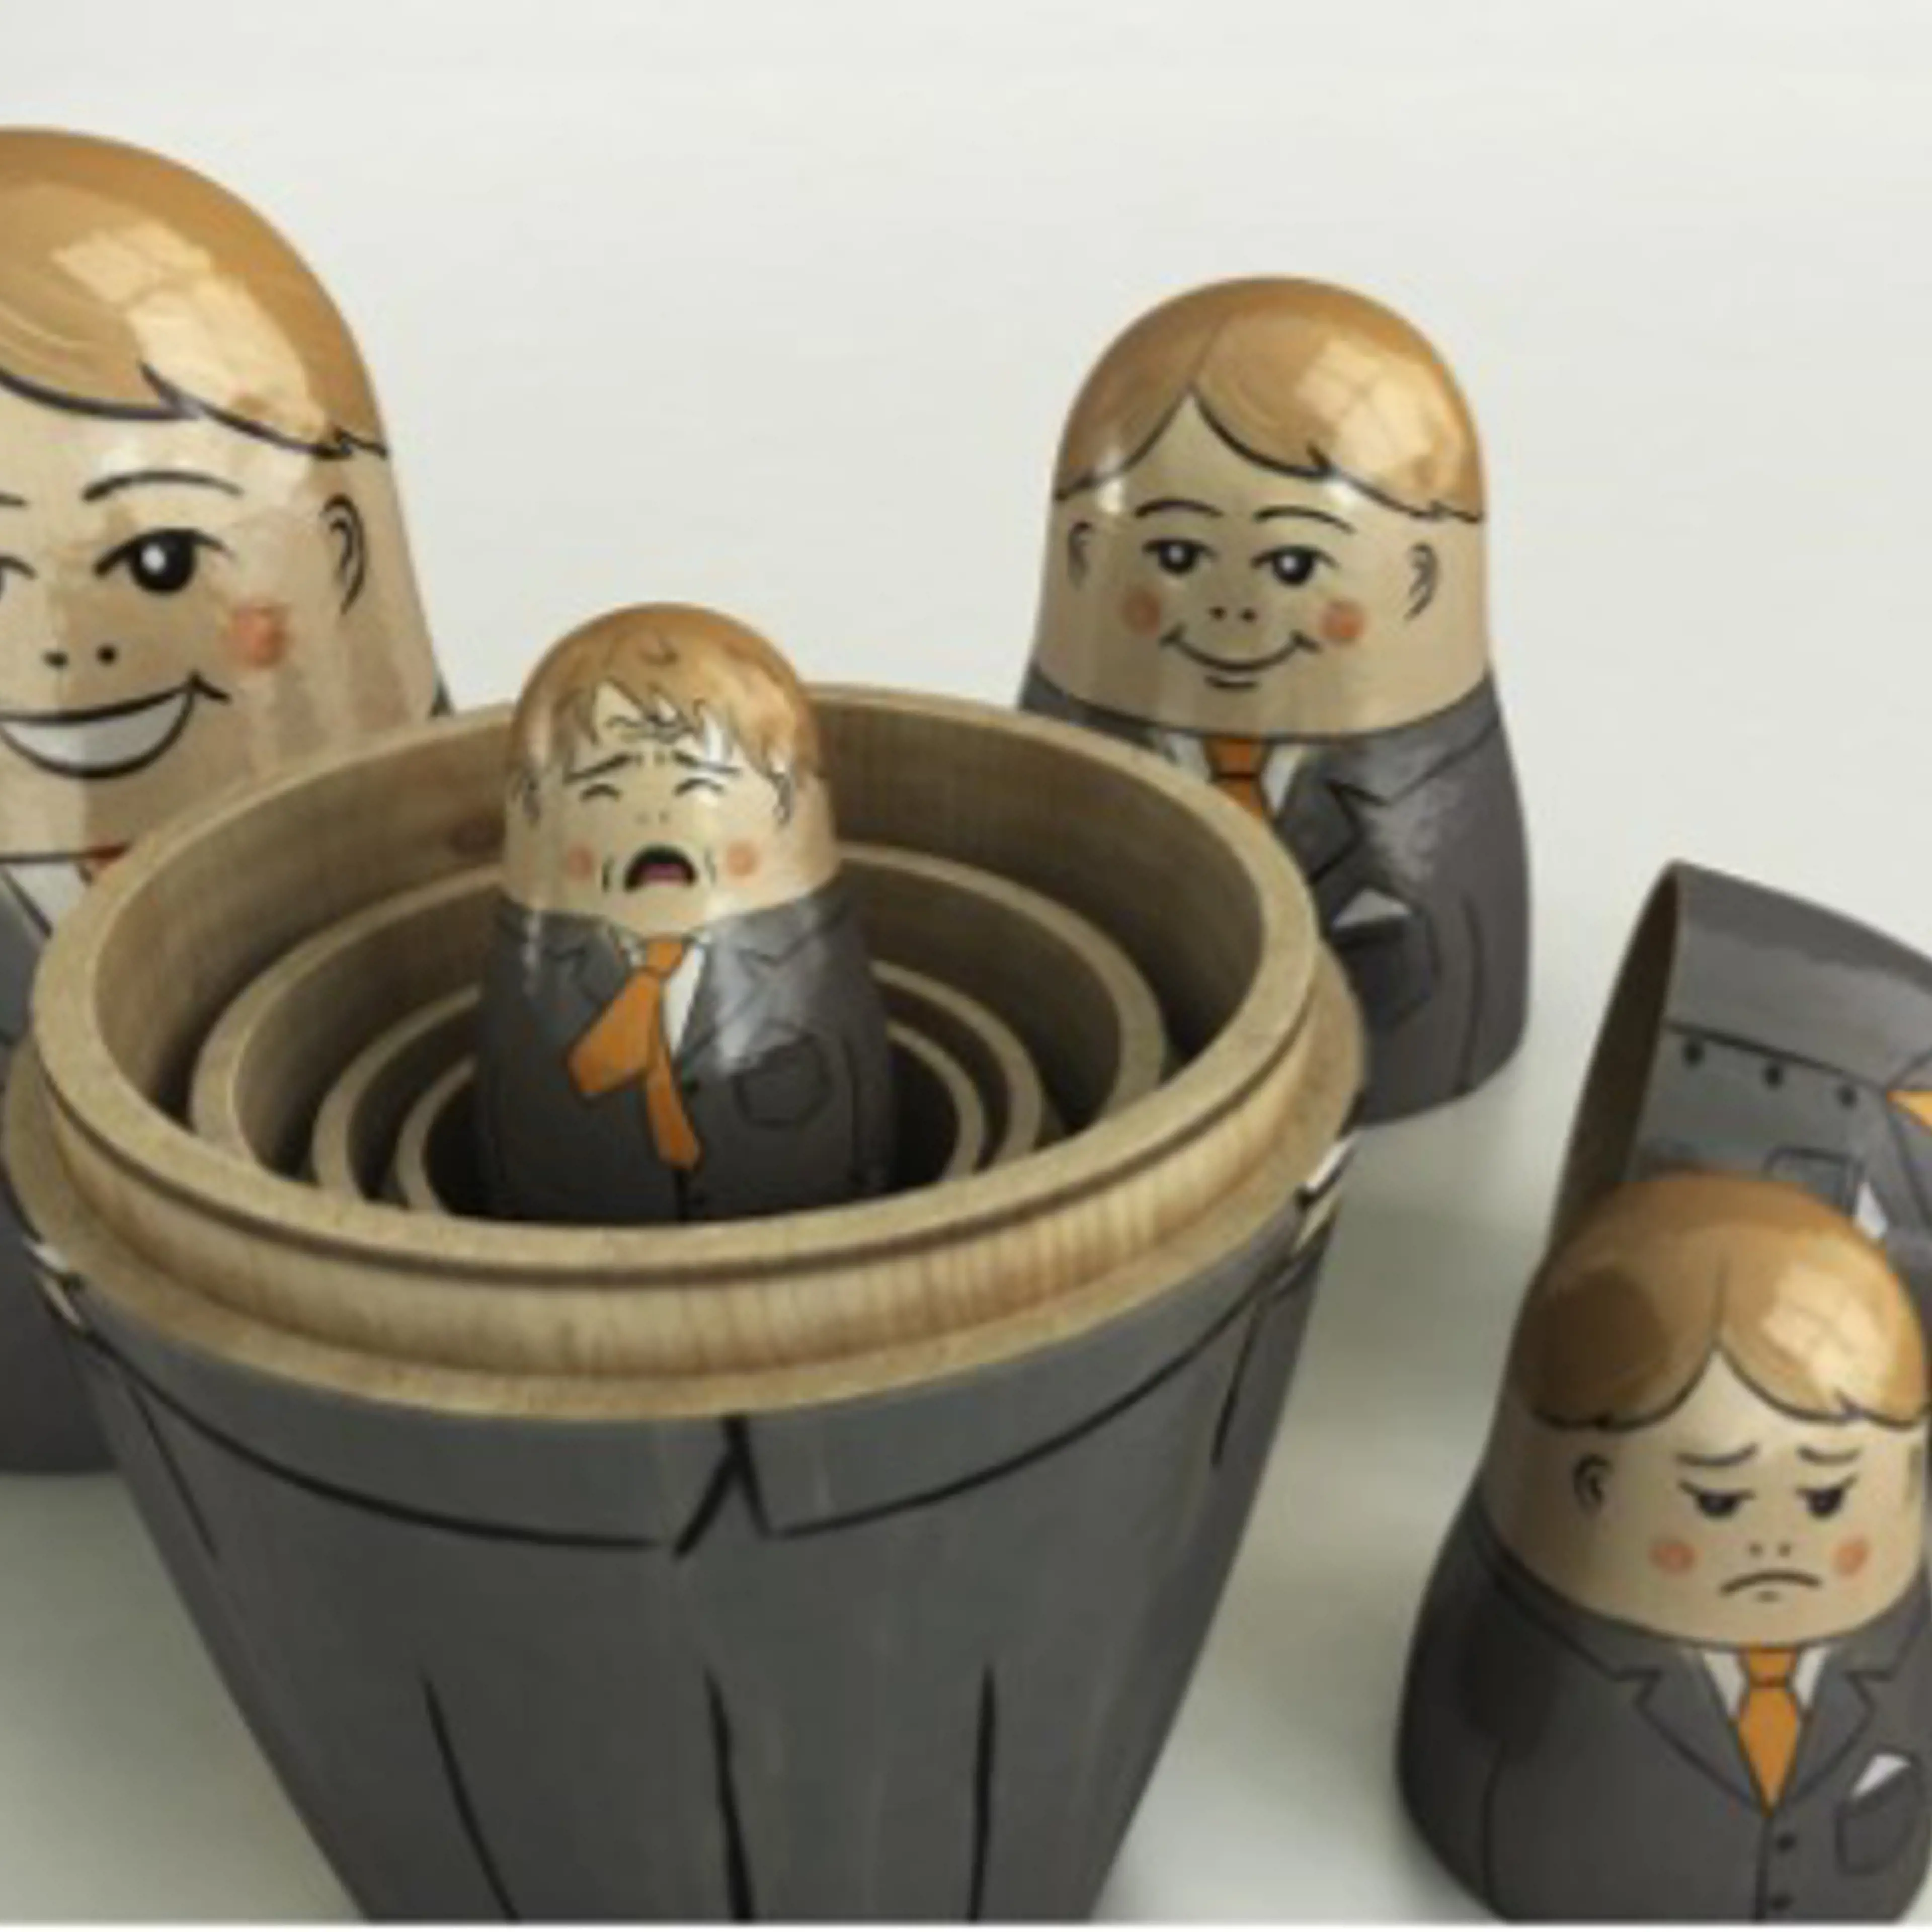 Manager as Russian dolls destacked, with faces changing from the biggest one smiling to the smallest one crying